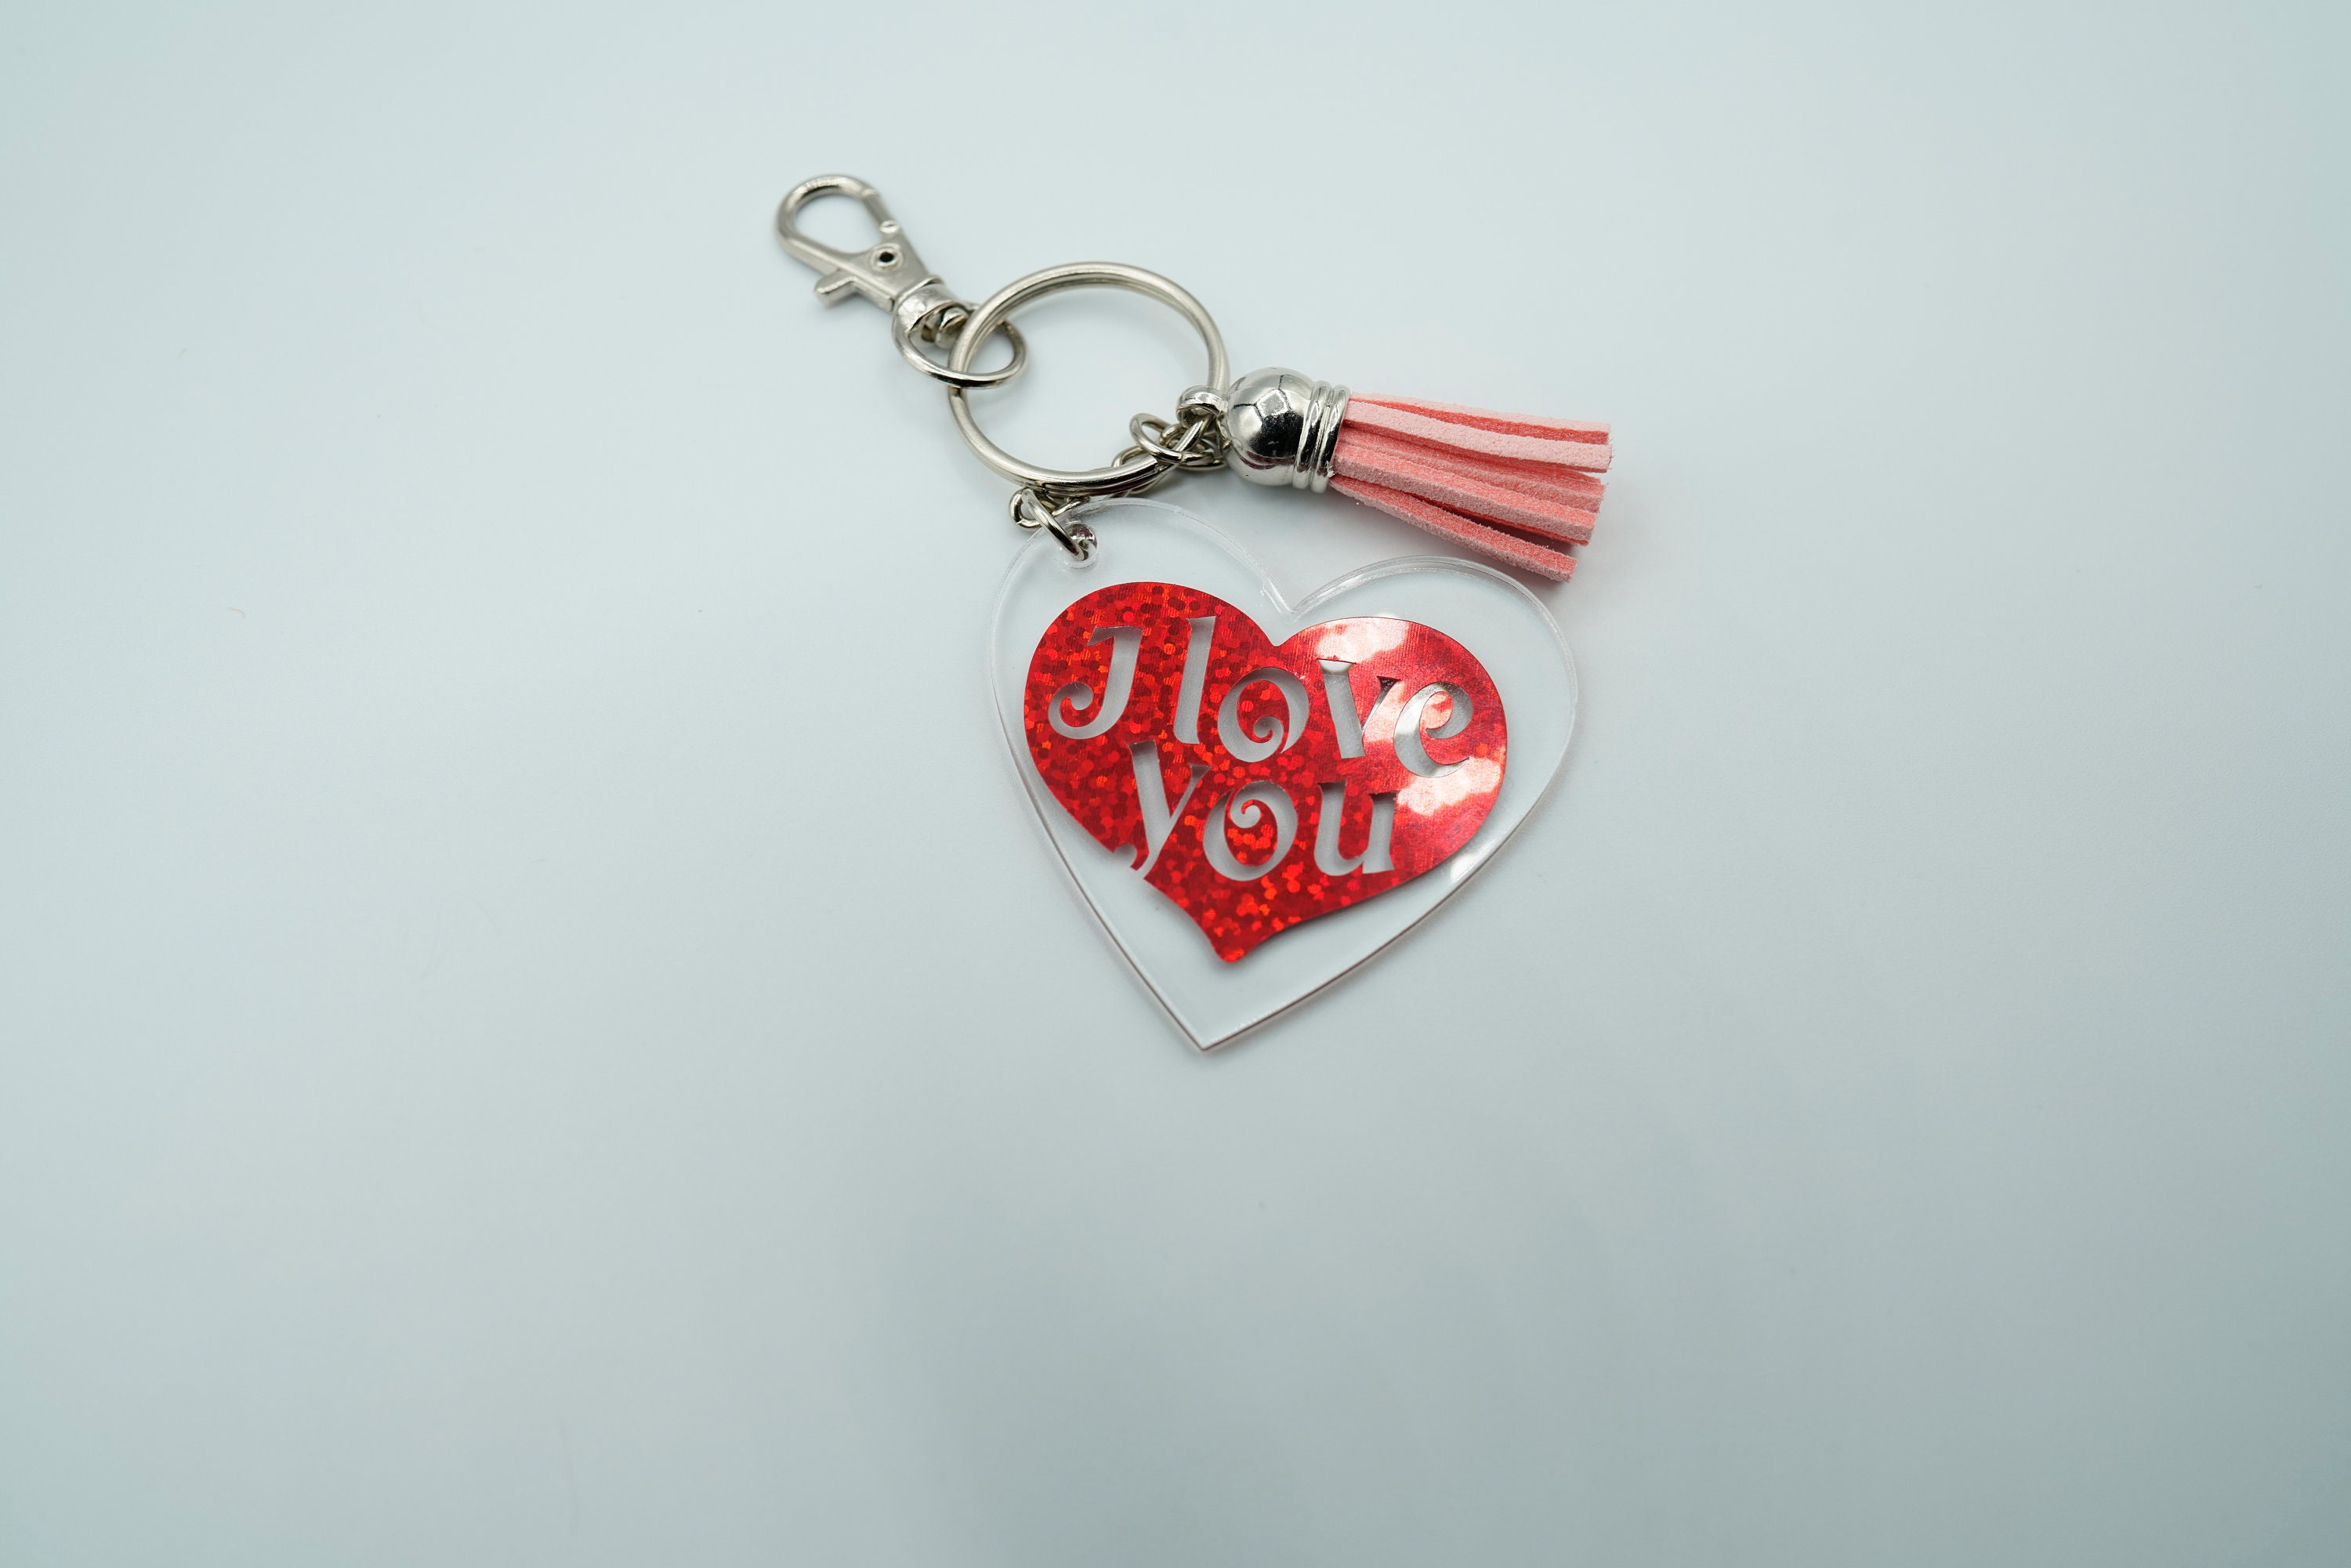 Heart Shaped Acrylic Keychain Keyring with I Love You in Red | Etsy